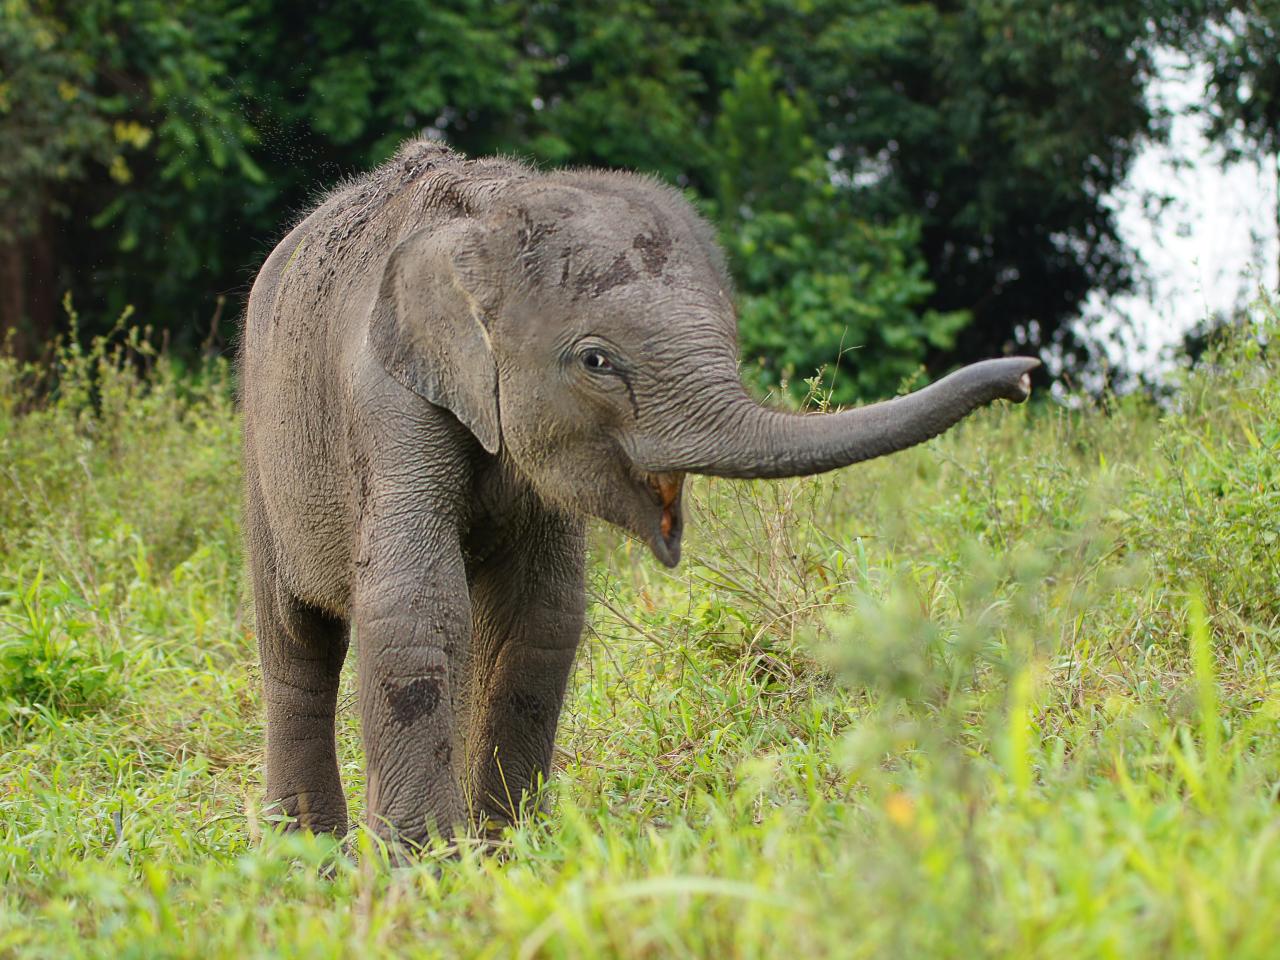 The Search for a Baby Forest Elephant's Mother, Nature and Wildlife